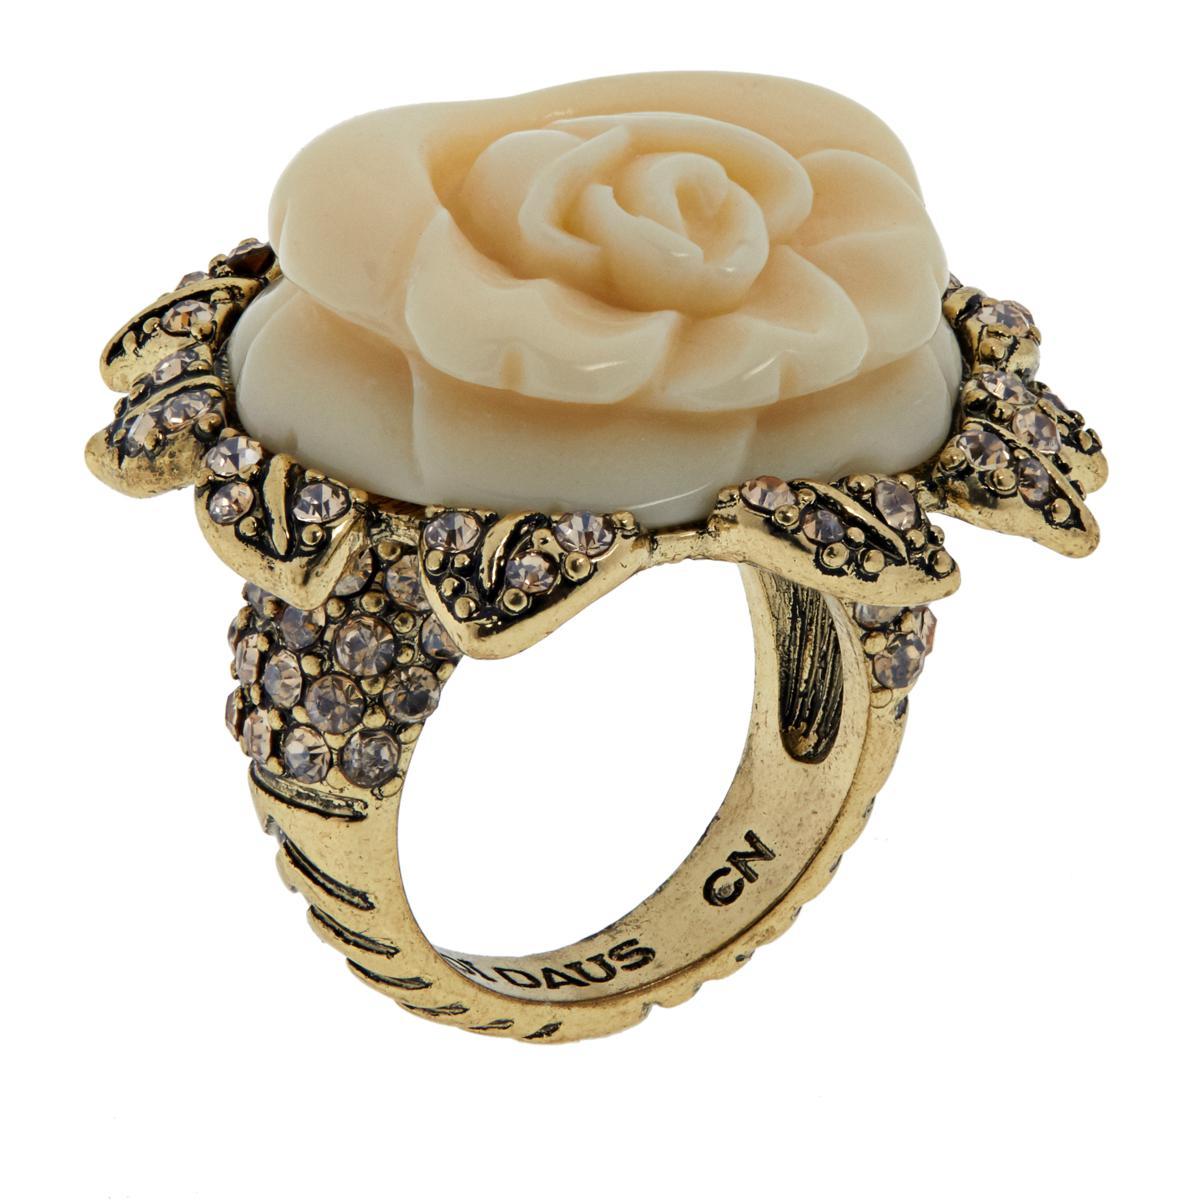 Heidi Daus Premier Rose Crystal Accented Ring SZ 12

Your new favorite statement floral? Looks a lot like the wondrous rose blossoming on this twinkling ring.

Design Information
Carved, ivory-color resin rose forms table
Petal-designed frame with